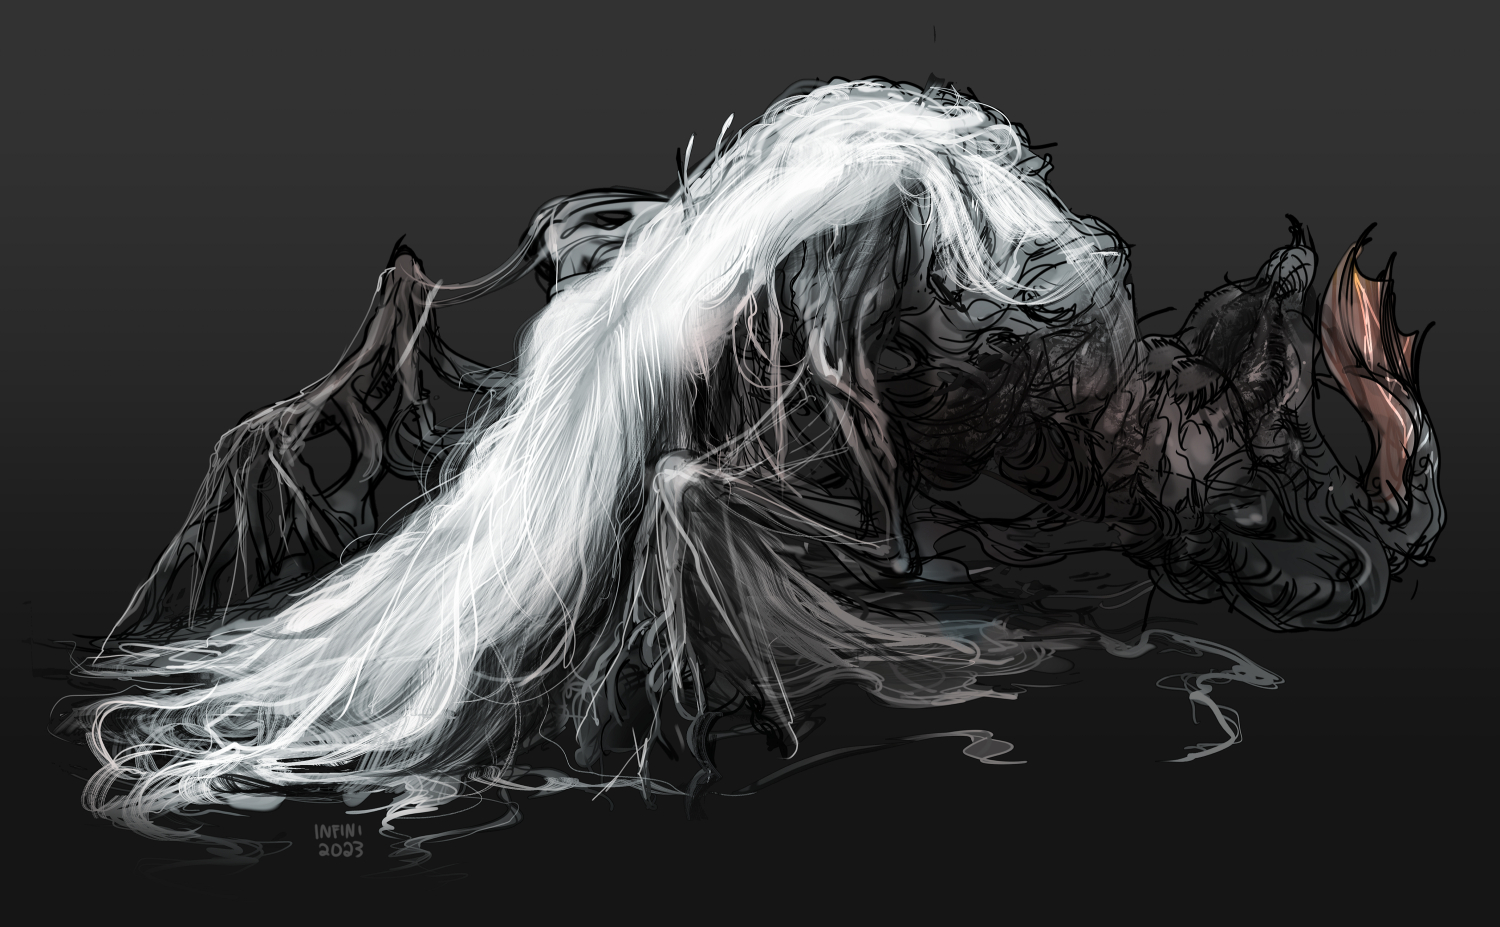 A digitally drawn depiction of a dessicated humanoid creature with long white hair that obscures most of it.